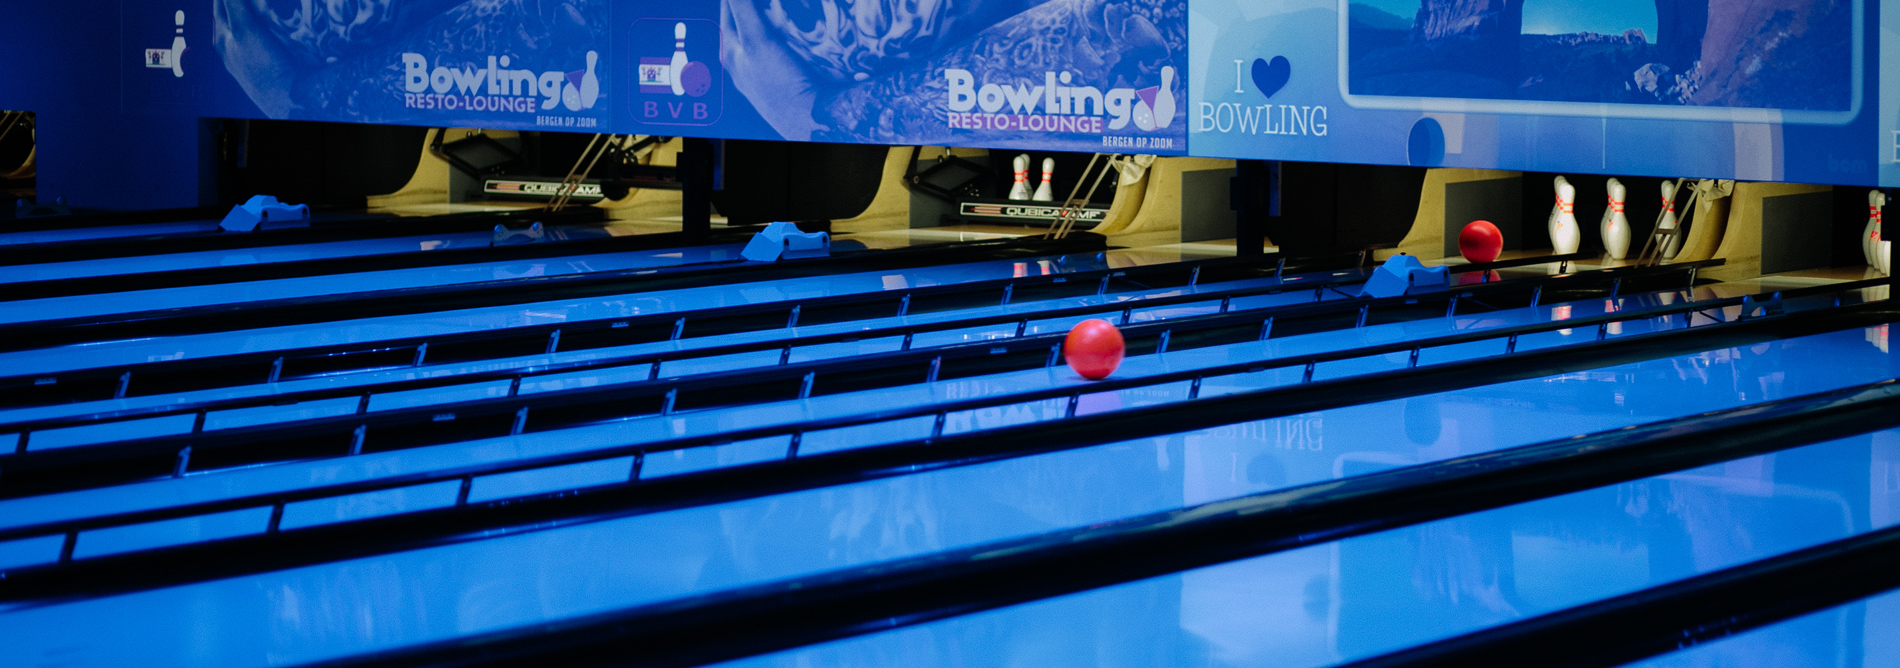 Bowling-QubicaAMF-Summit-Features-banner.jpg